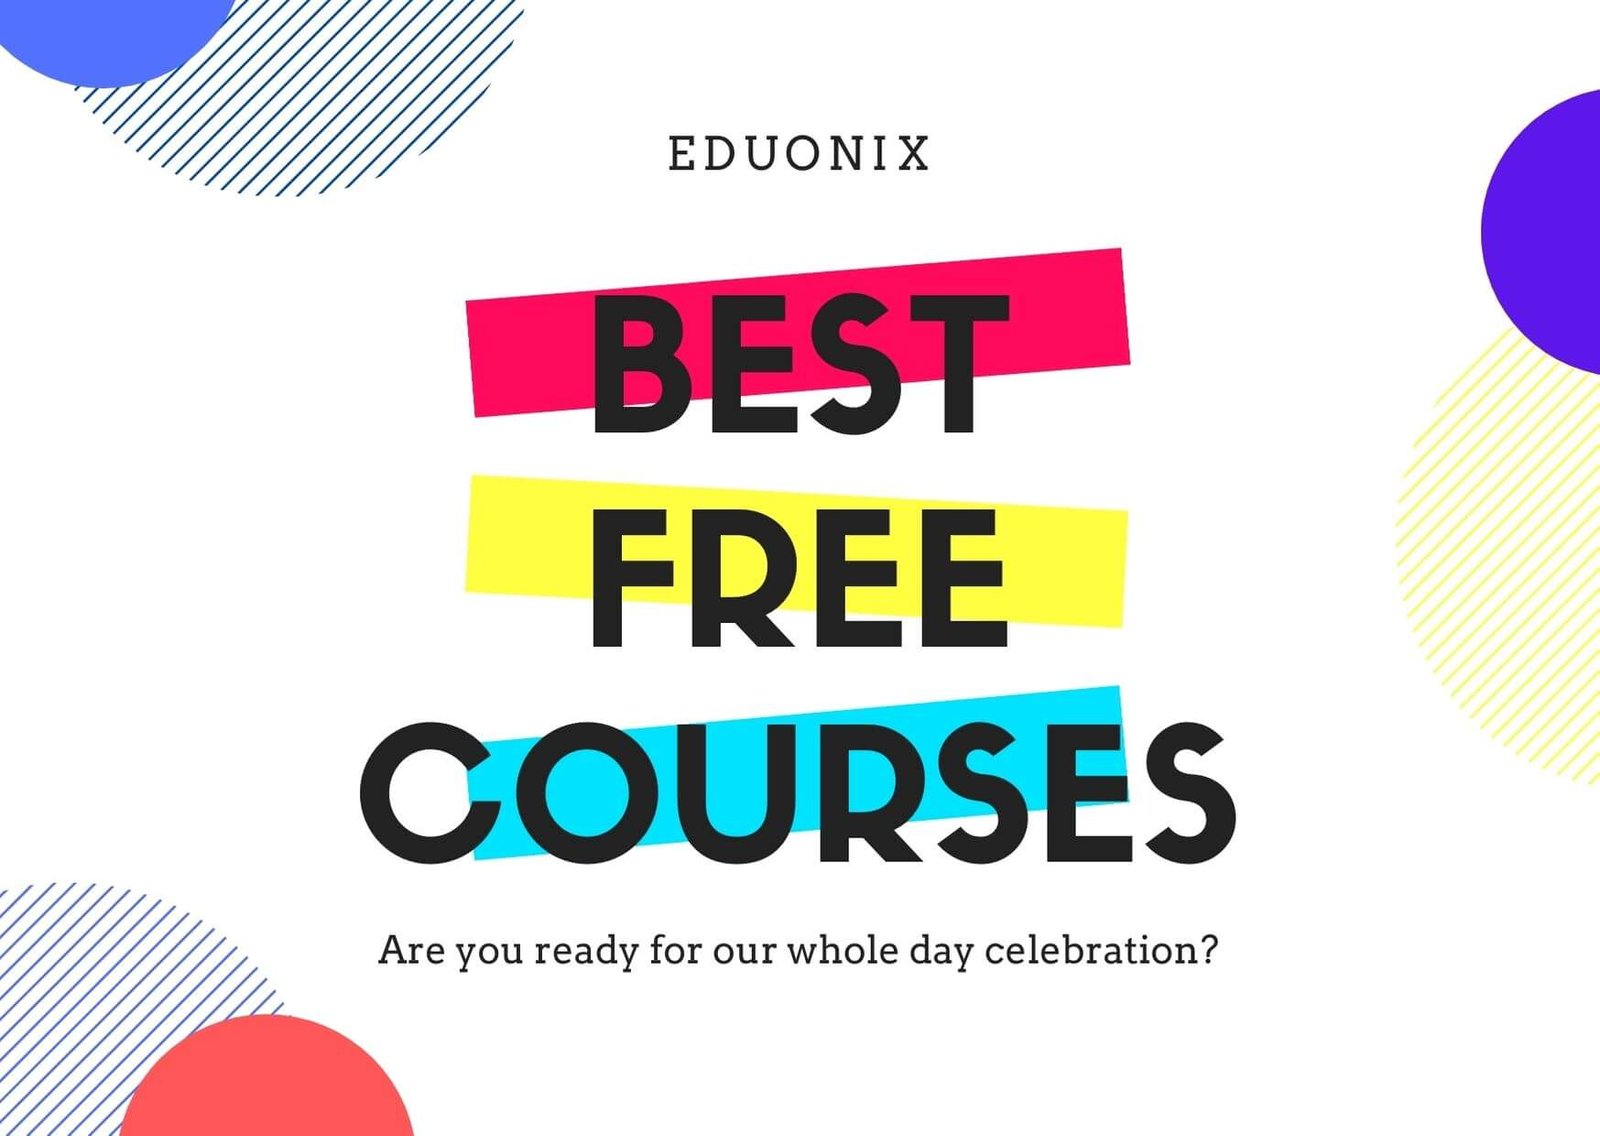 4.9+ Rated Free Online Courses from eduonix [UPDATED January 2021]